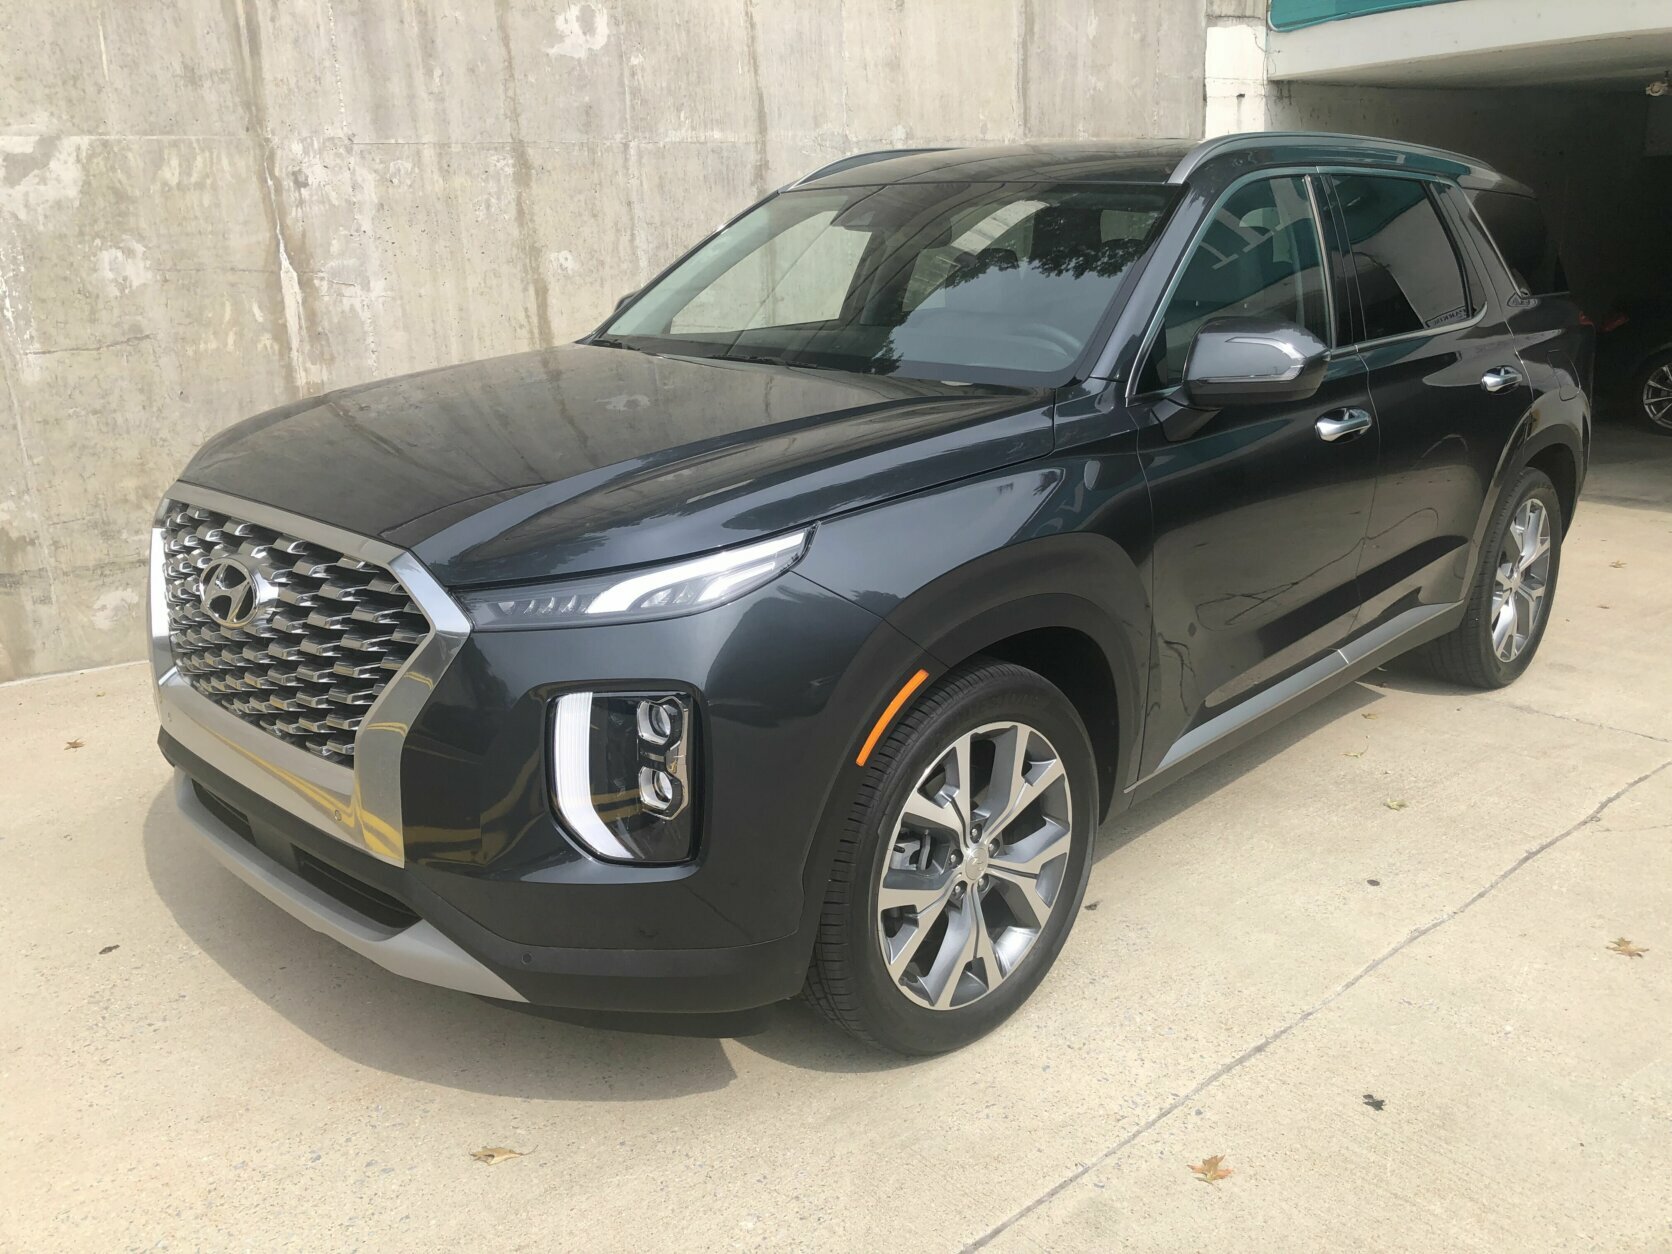 <p><strong>2020 Hyundai Palisade SEL AWD</strong></p>
<p><strong>Price:</strong> $43,155 as driven</p>
<p>The Hyundai punches well above its weight, offering many of the luxuries of more expensive SUVs at a lower price.</p>
